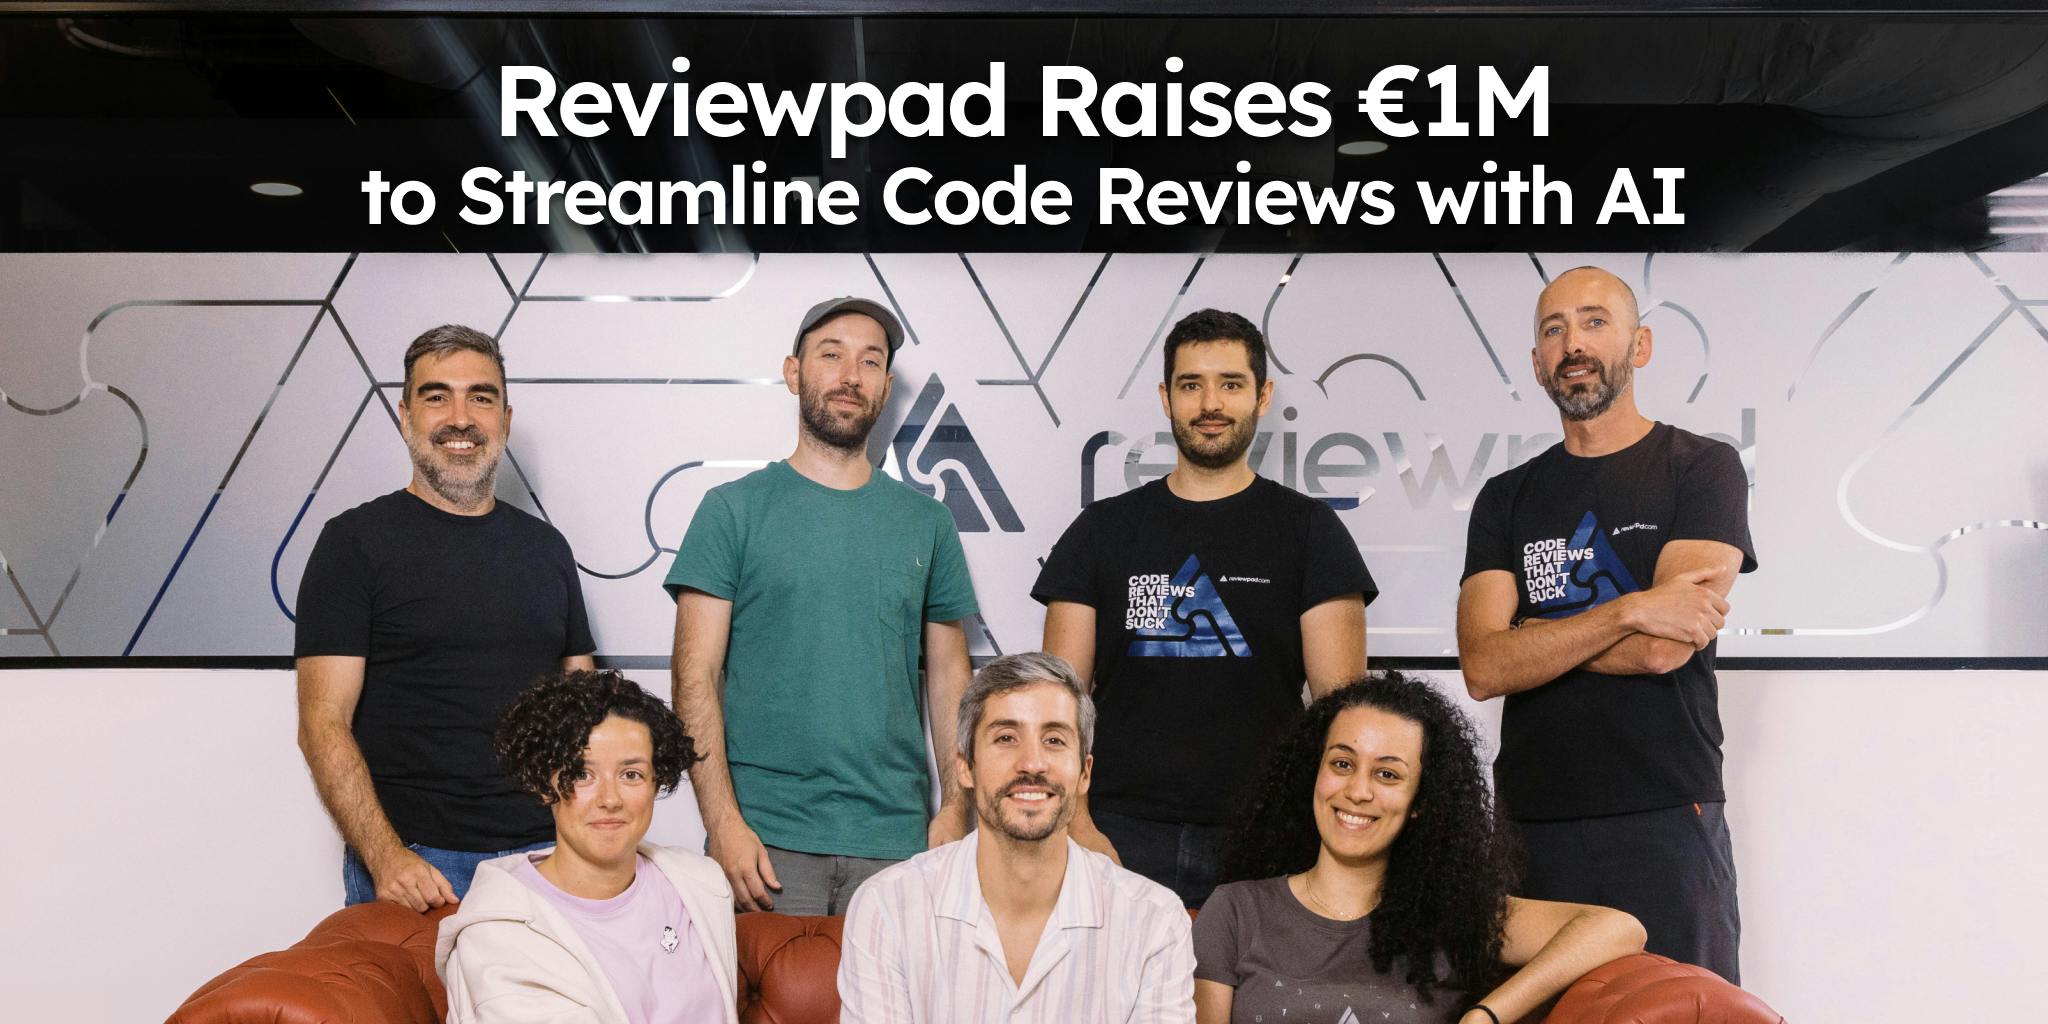 Announcing €1M Funding to Streamline Code Reviews with Artificial Intelligence